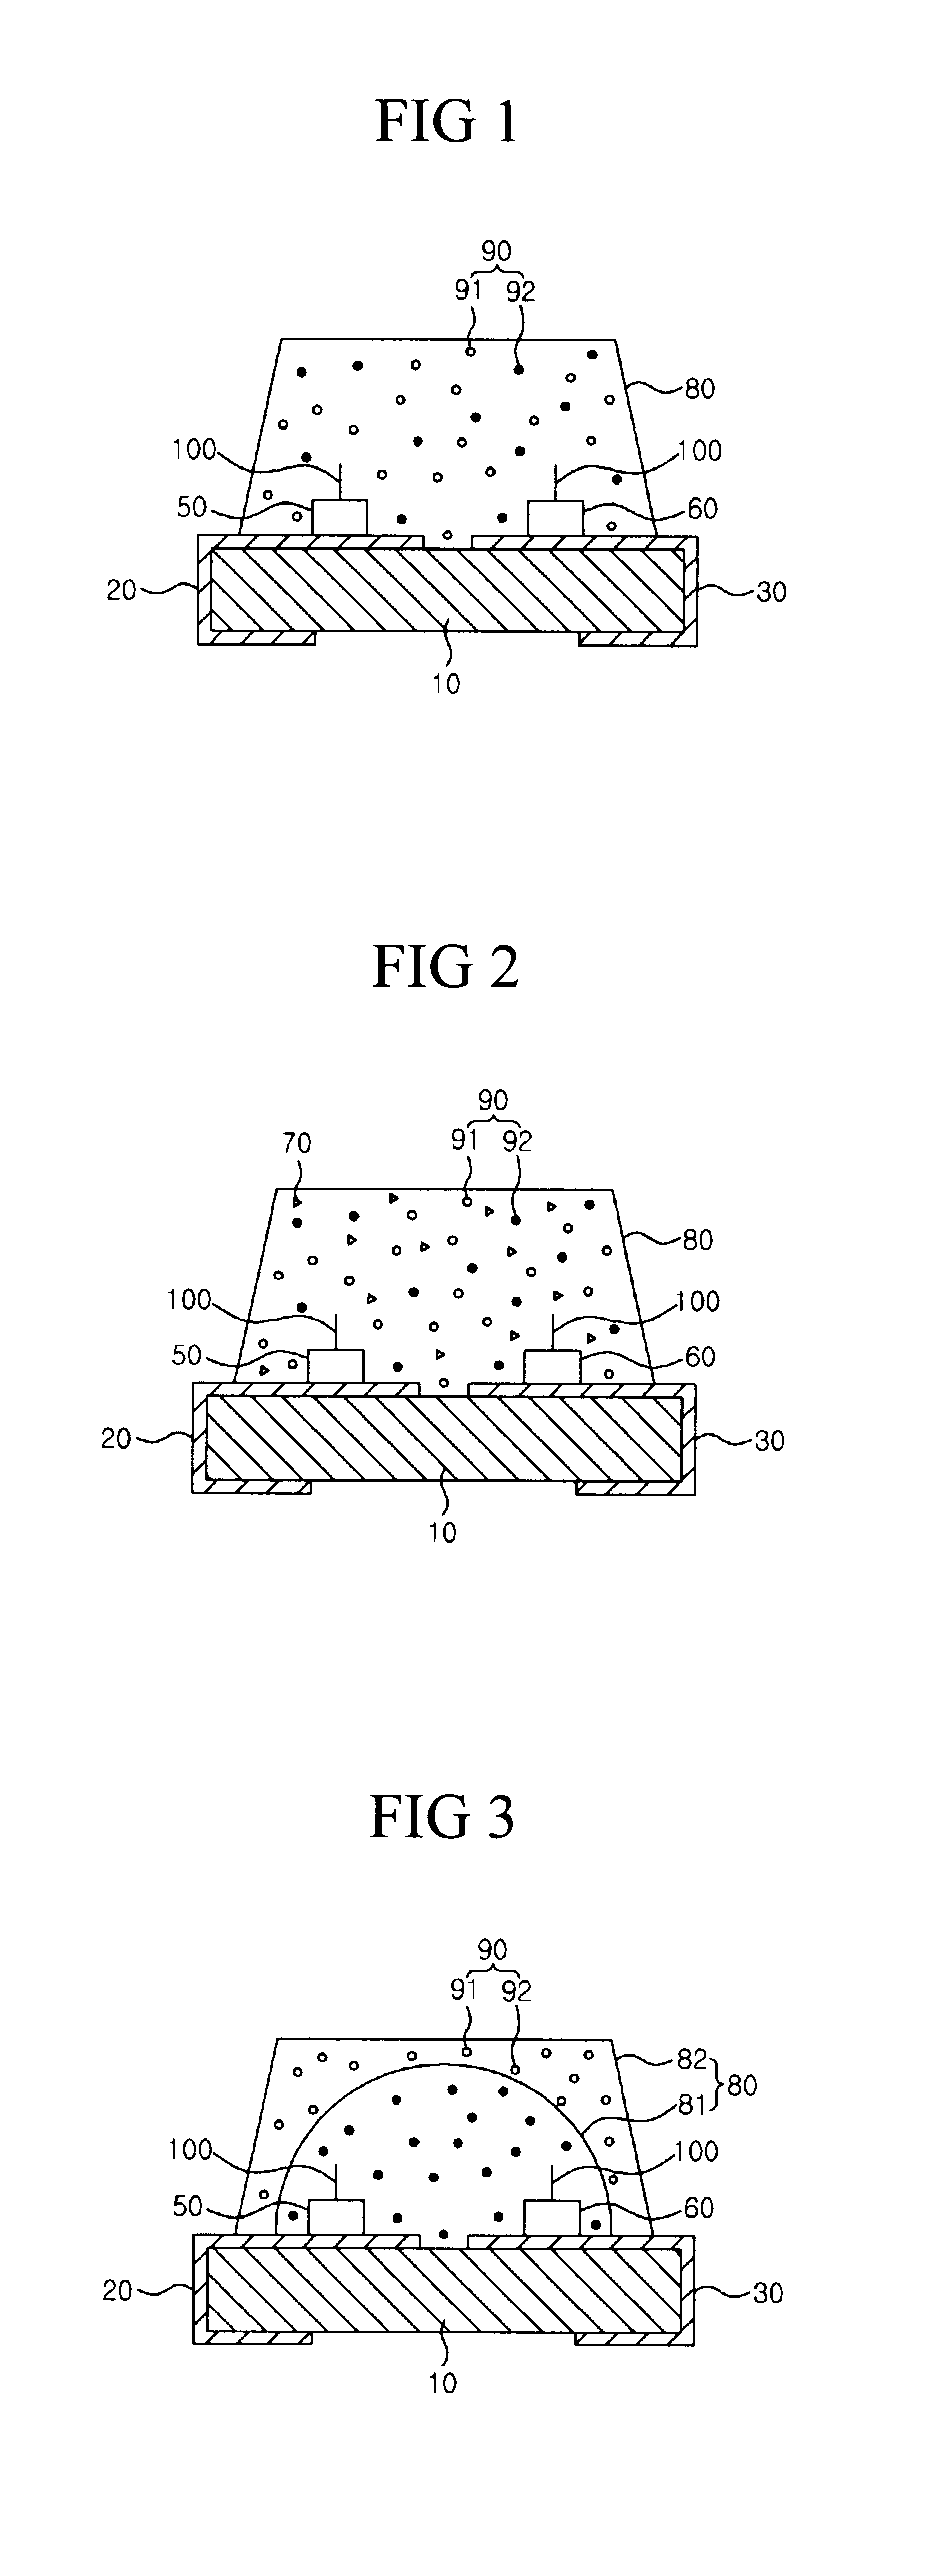 Light emitting device having plural light emitting diodes and at least one phosphor for emitting different wavelengths of light